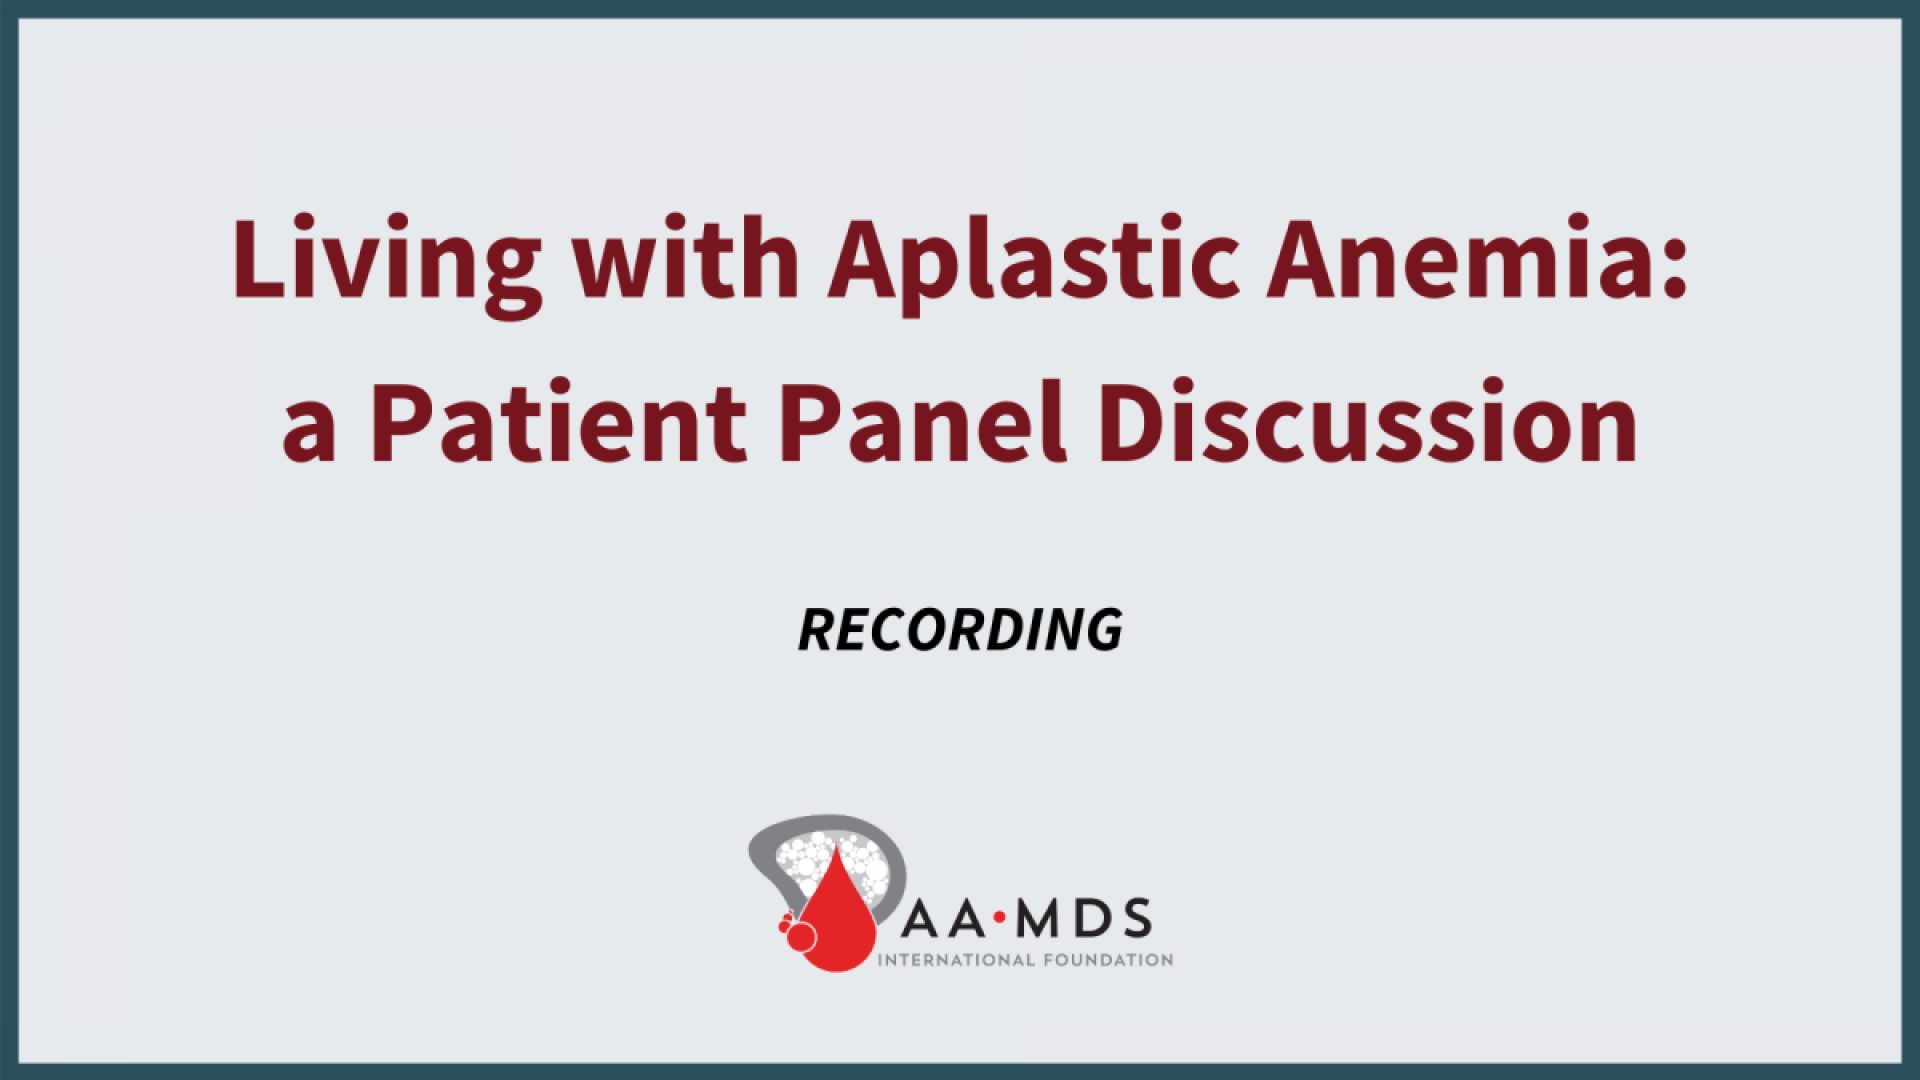 Living with aplastic anemia: a patient panel discussion